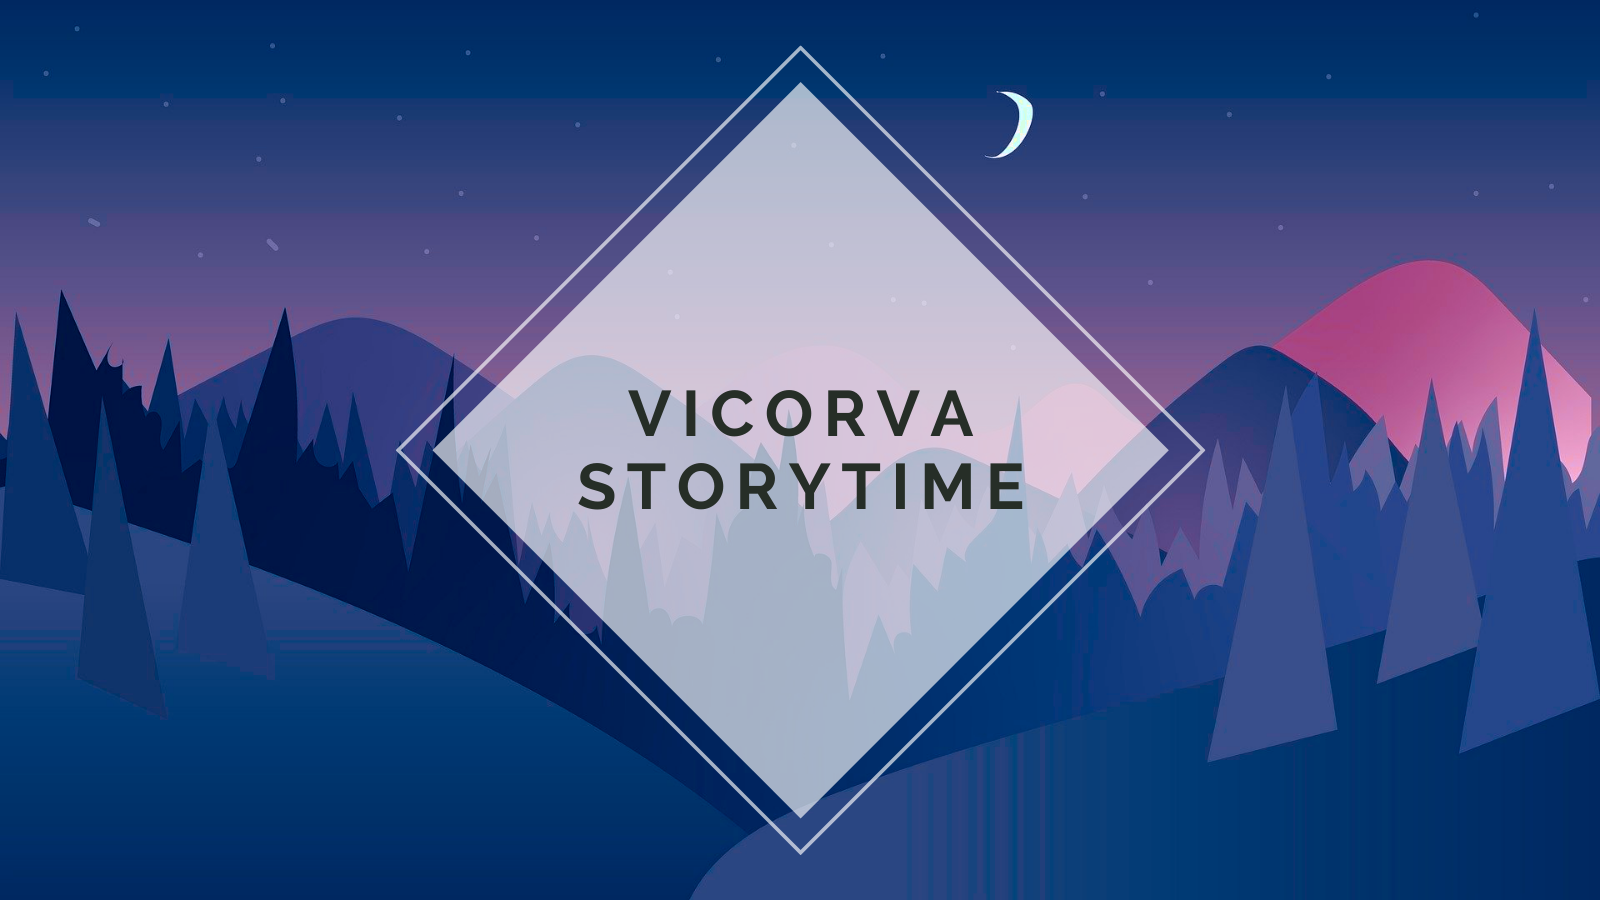 #VicorvaStorytime: The End of the Feud